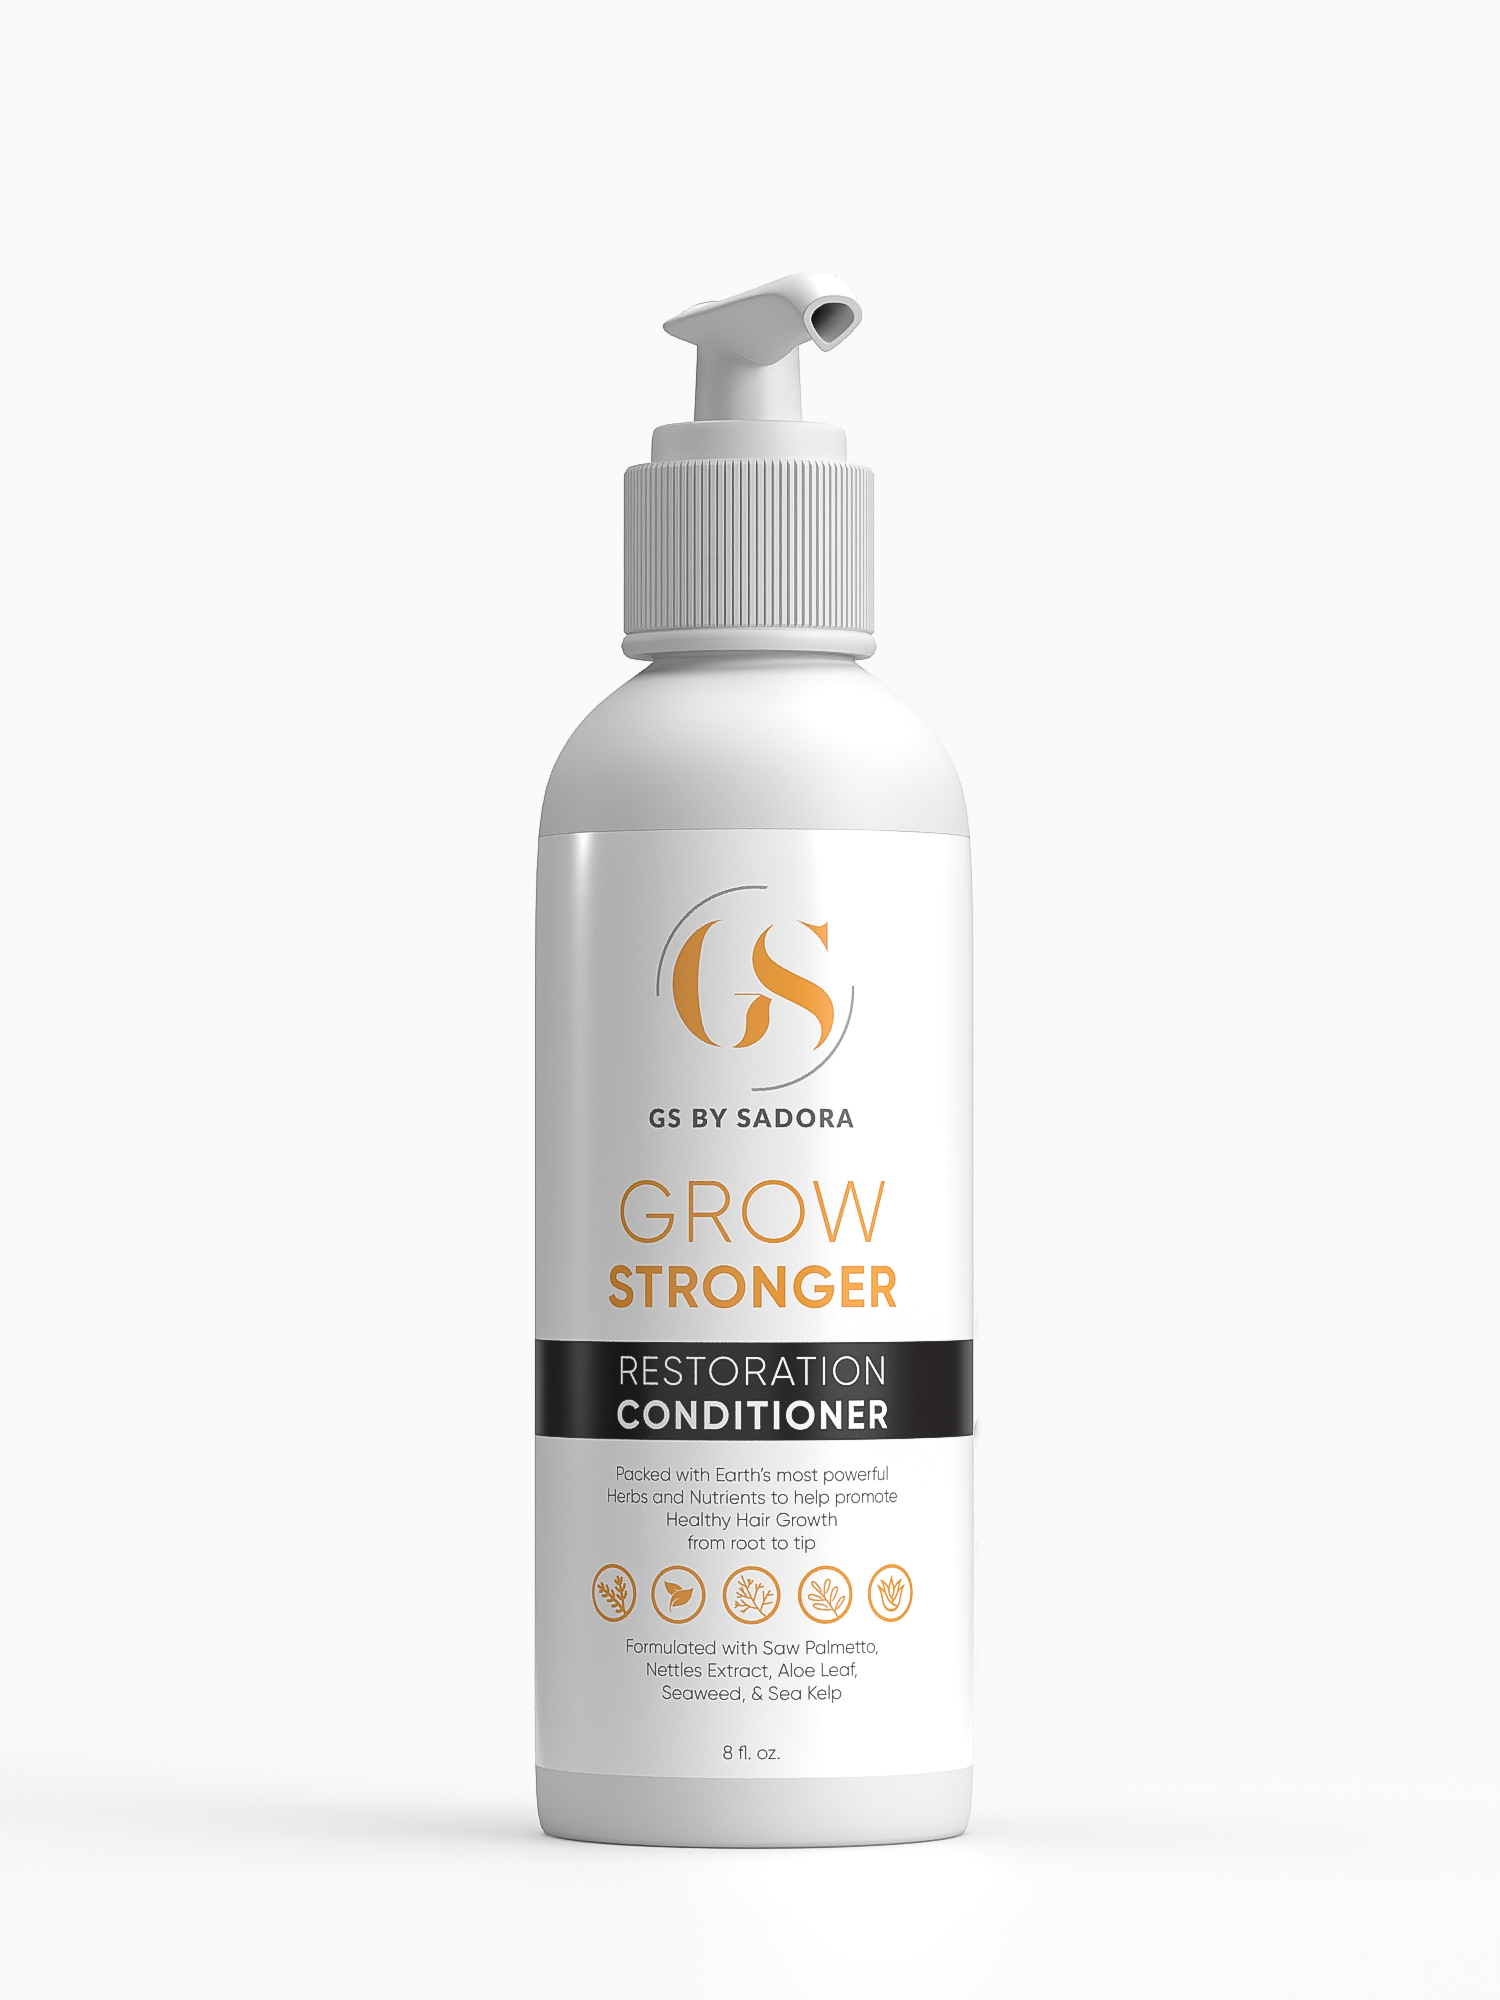 Hair Growth Conditioner